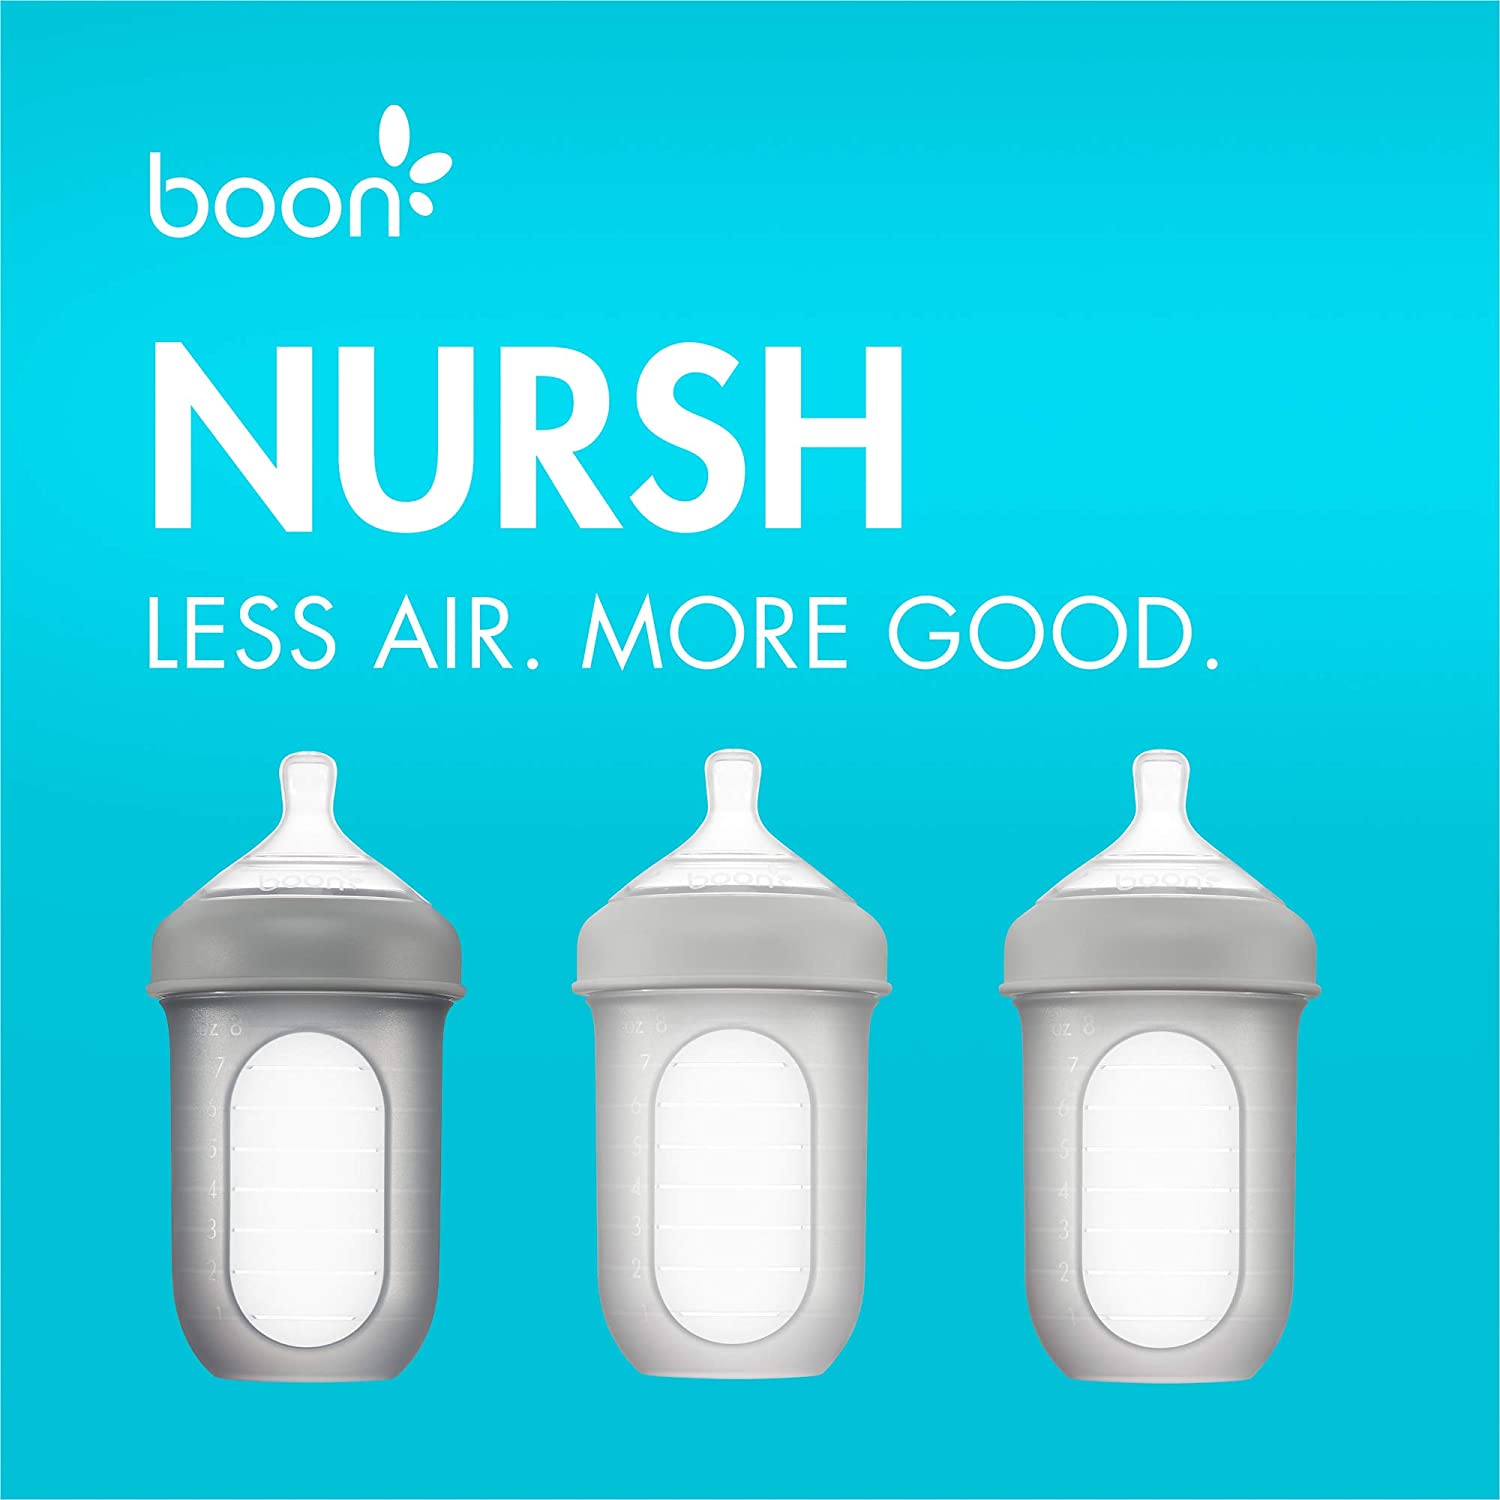 https://cdn.shopify.com/s/files/1/1300/6865/products/Boon-NURSH-Silicone-Pouch-Bottle-8oz-3-Pack-Gray-BOON-2.jpg?v=1656467352&width=1500